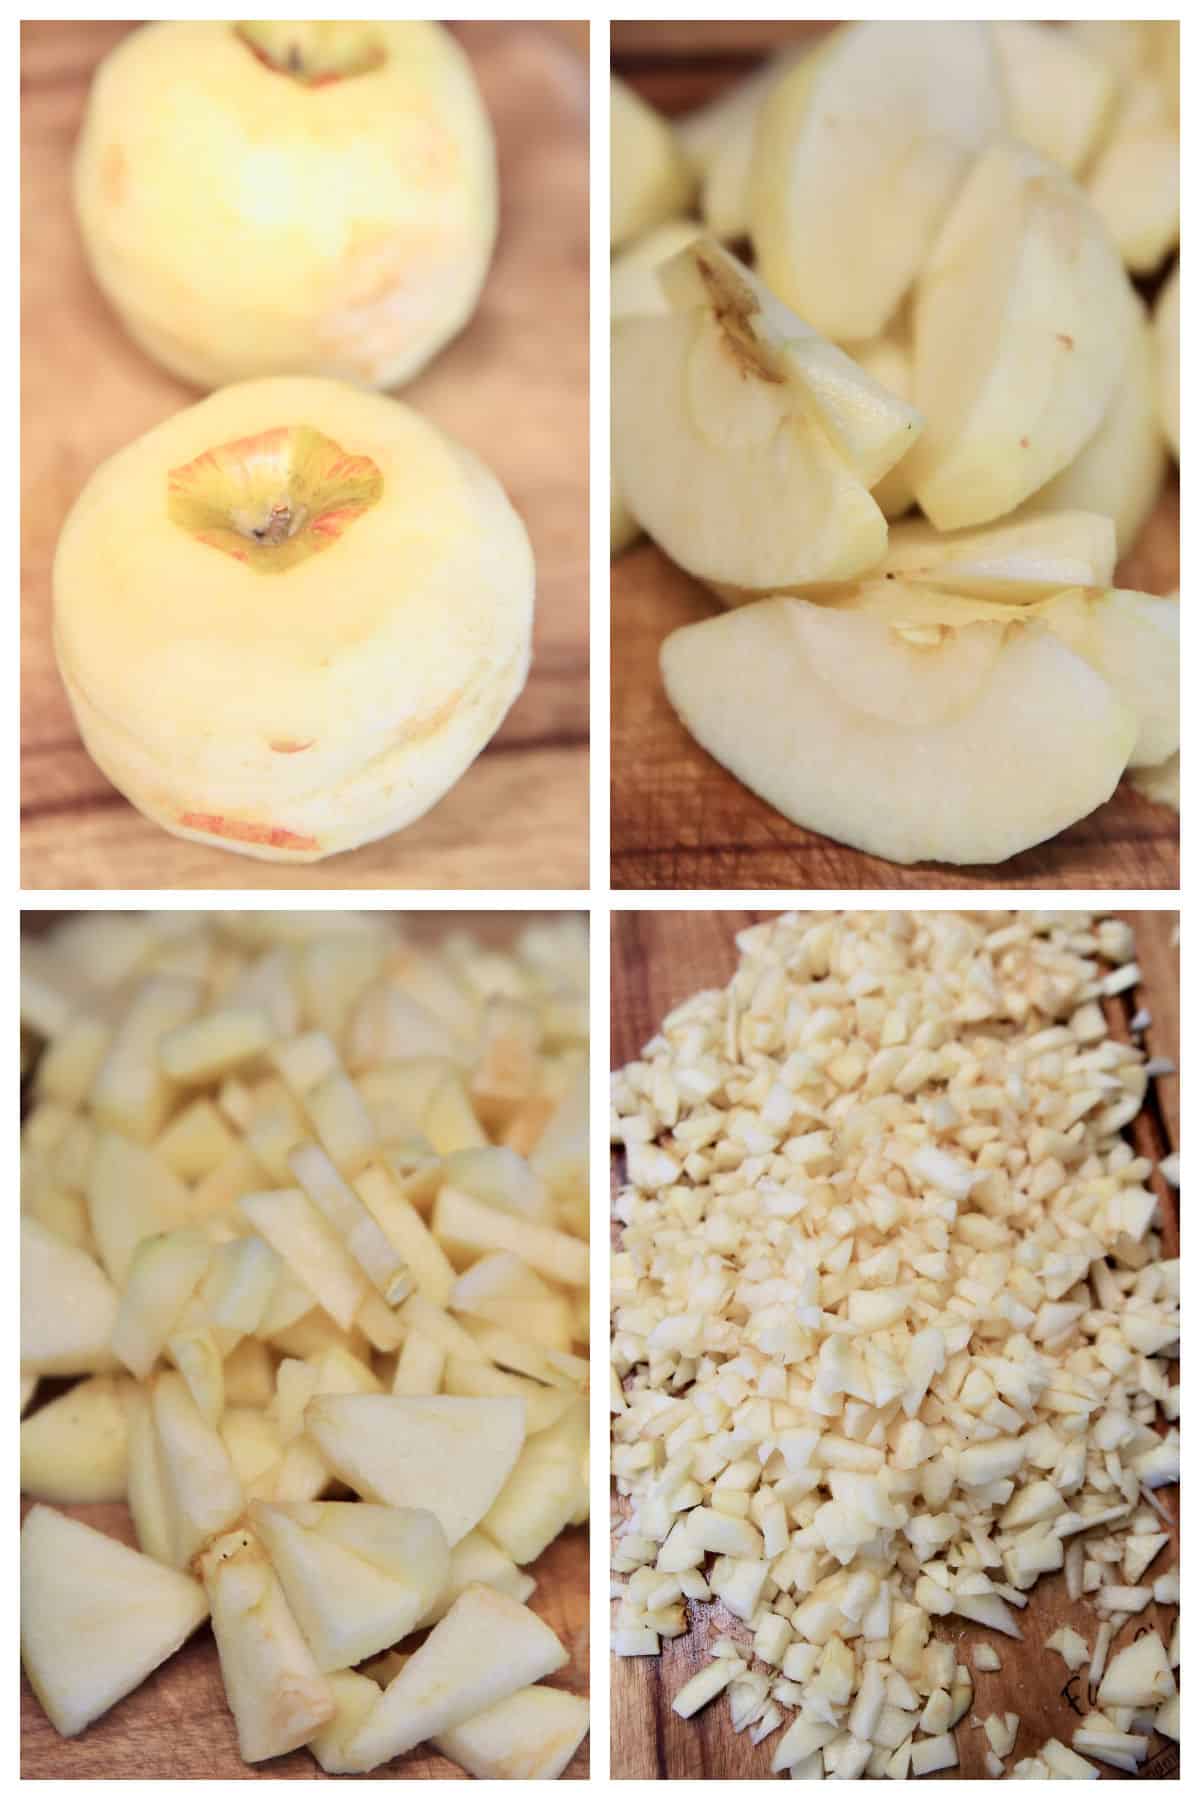 Apple collage: peeled, sliced, chopped, diced